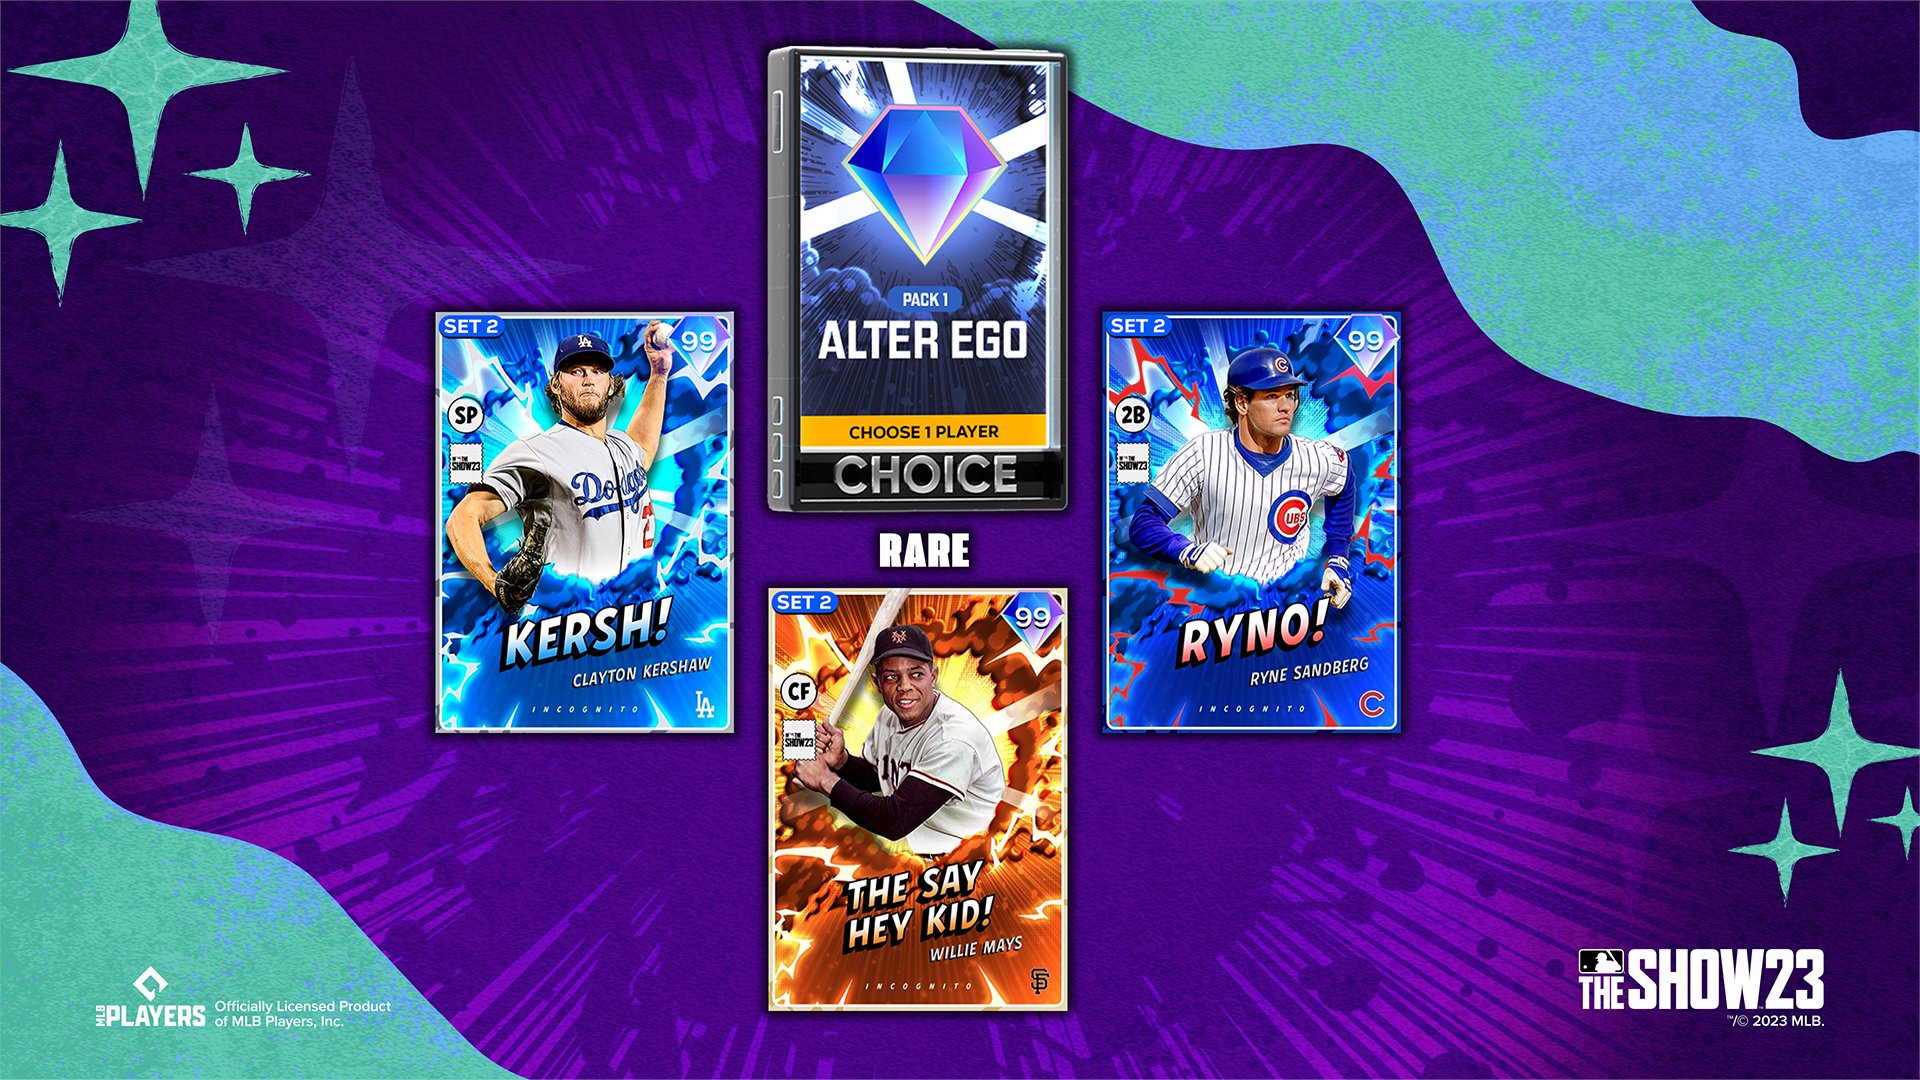 MLB The Show 23: Alter Ego and Diamond Duos Pack 14 Available Now